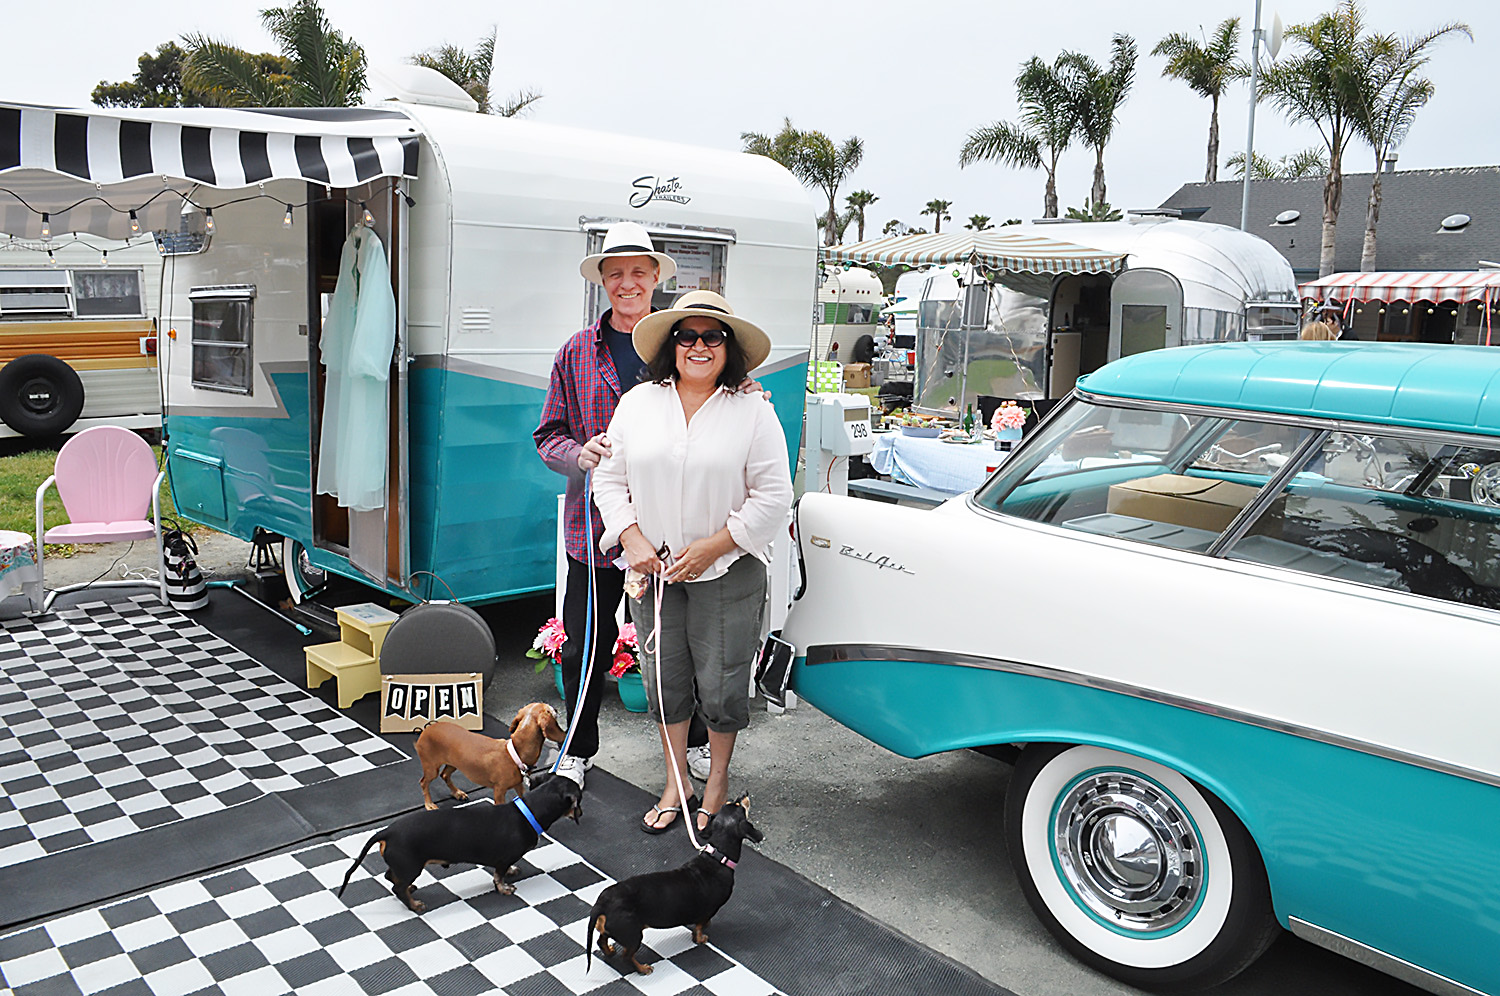 Couple pose in front of light blue sedan and trailer.